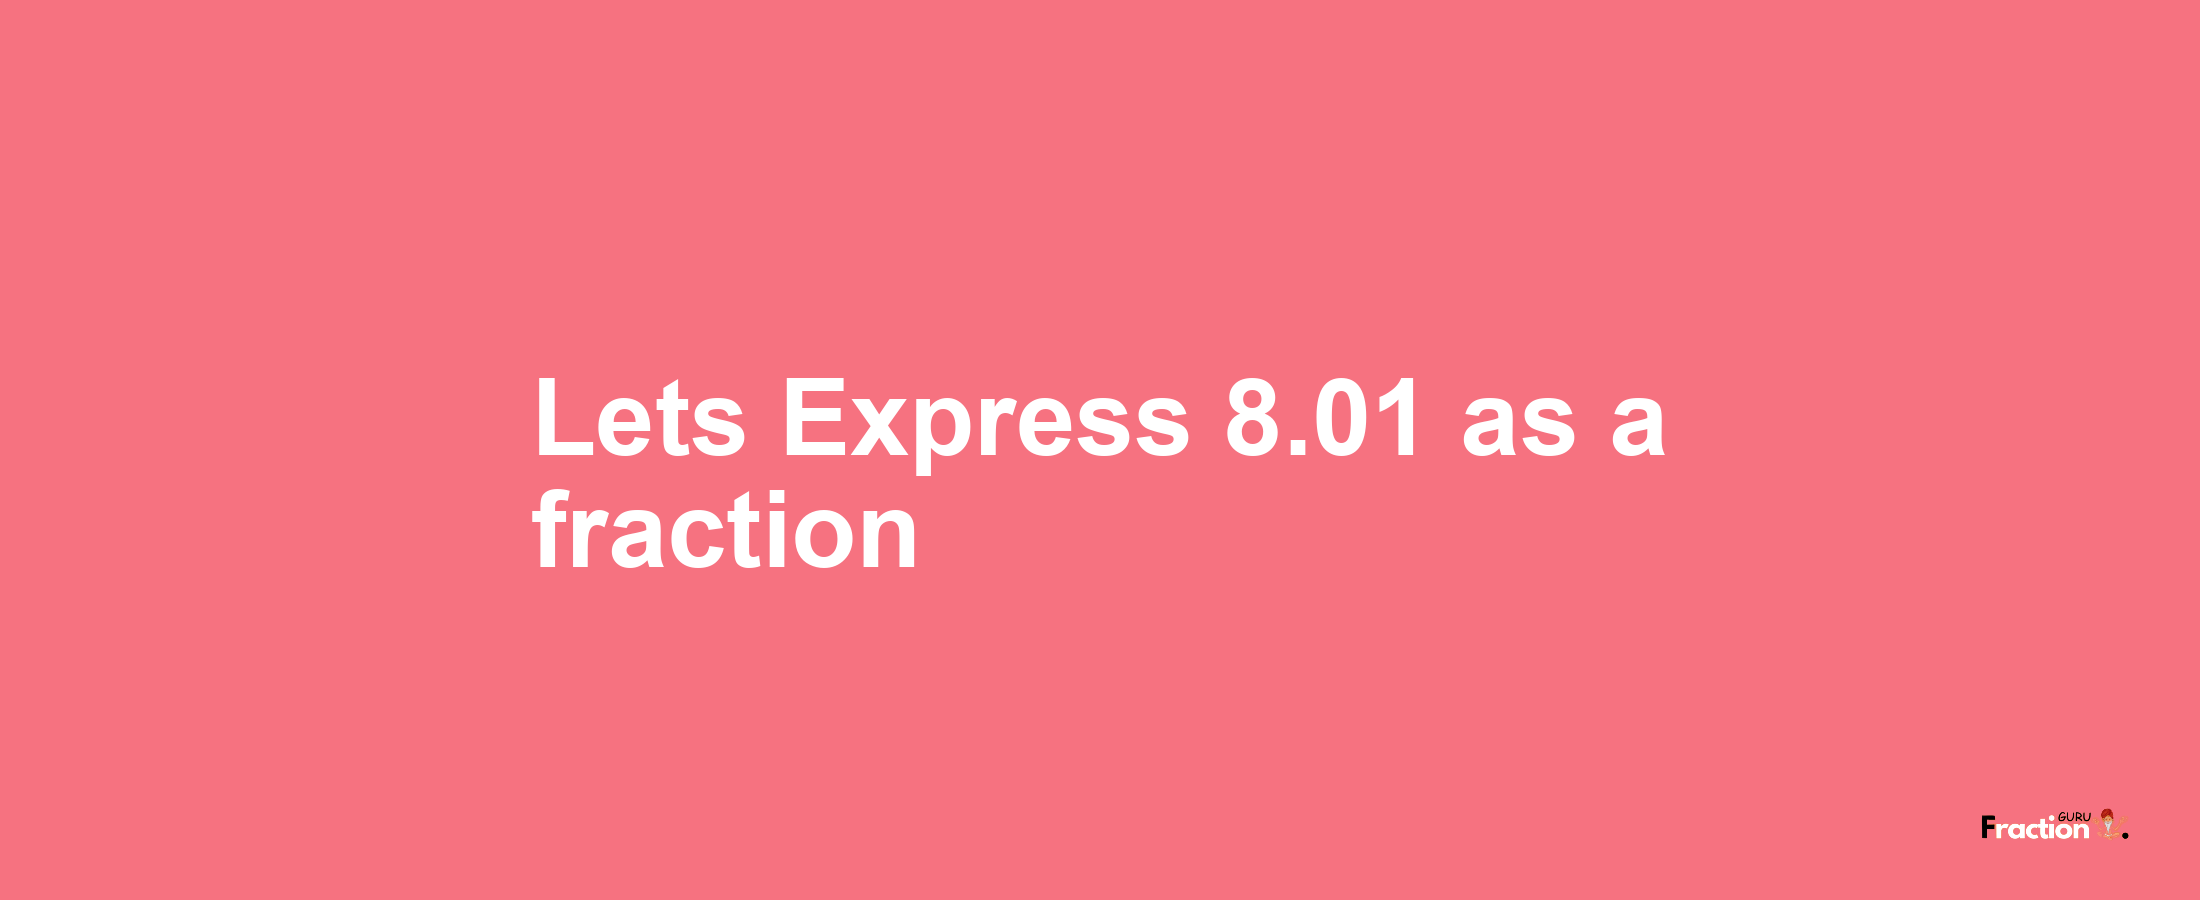 Lets Express 8.01 as afraction